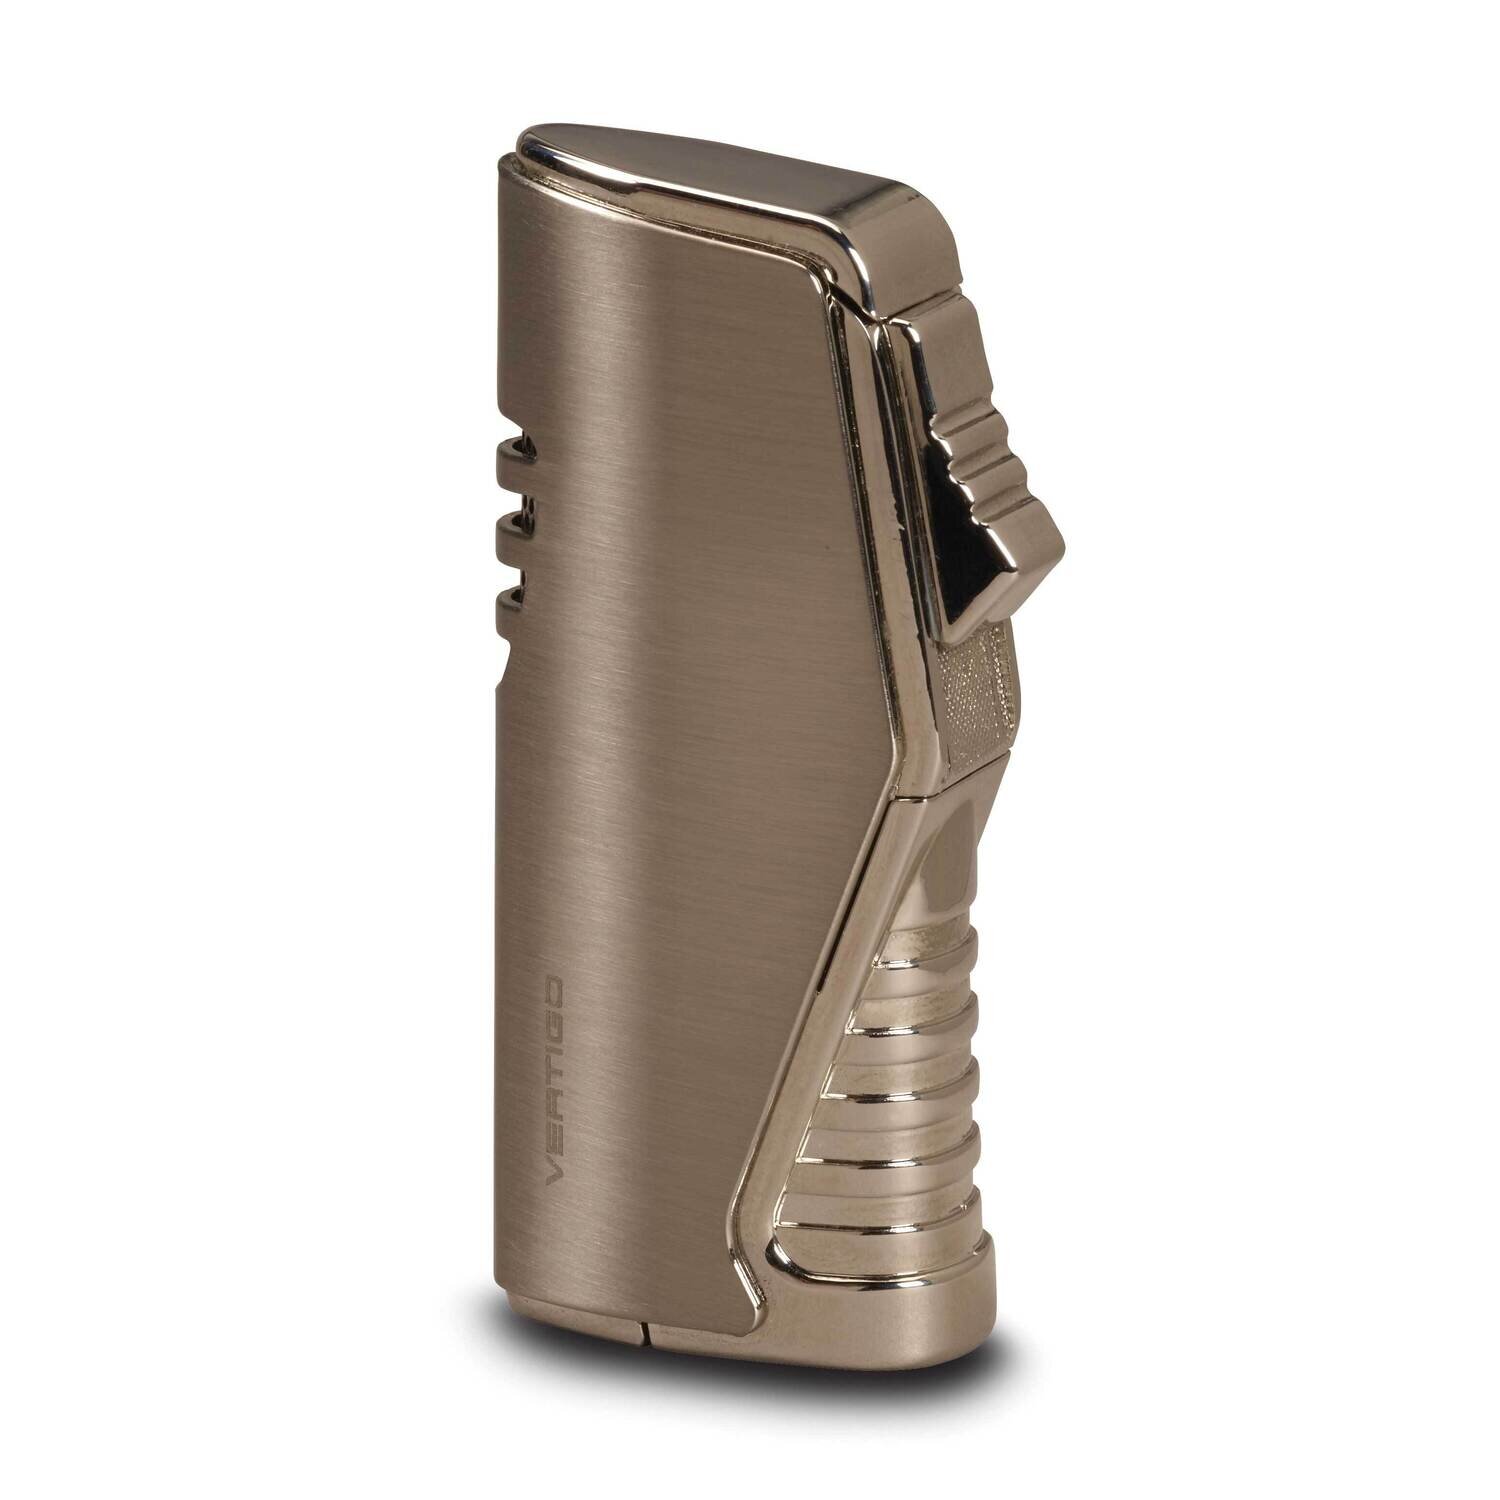 Atlas Triple Flame Lighter with Fold-out Punch Nickel GM23327